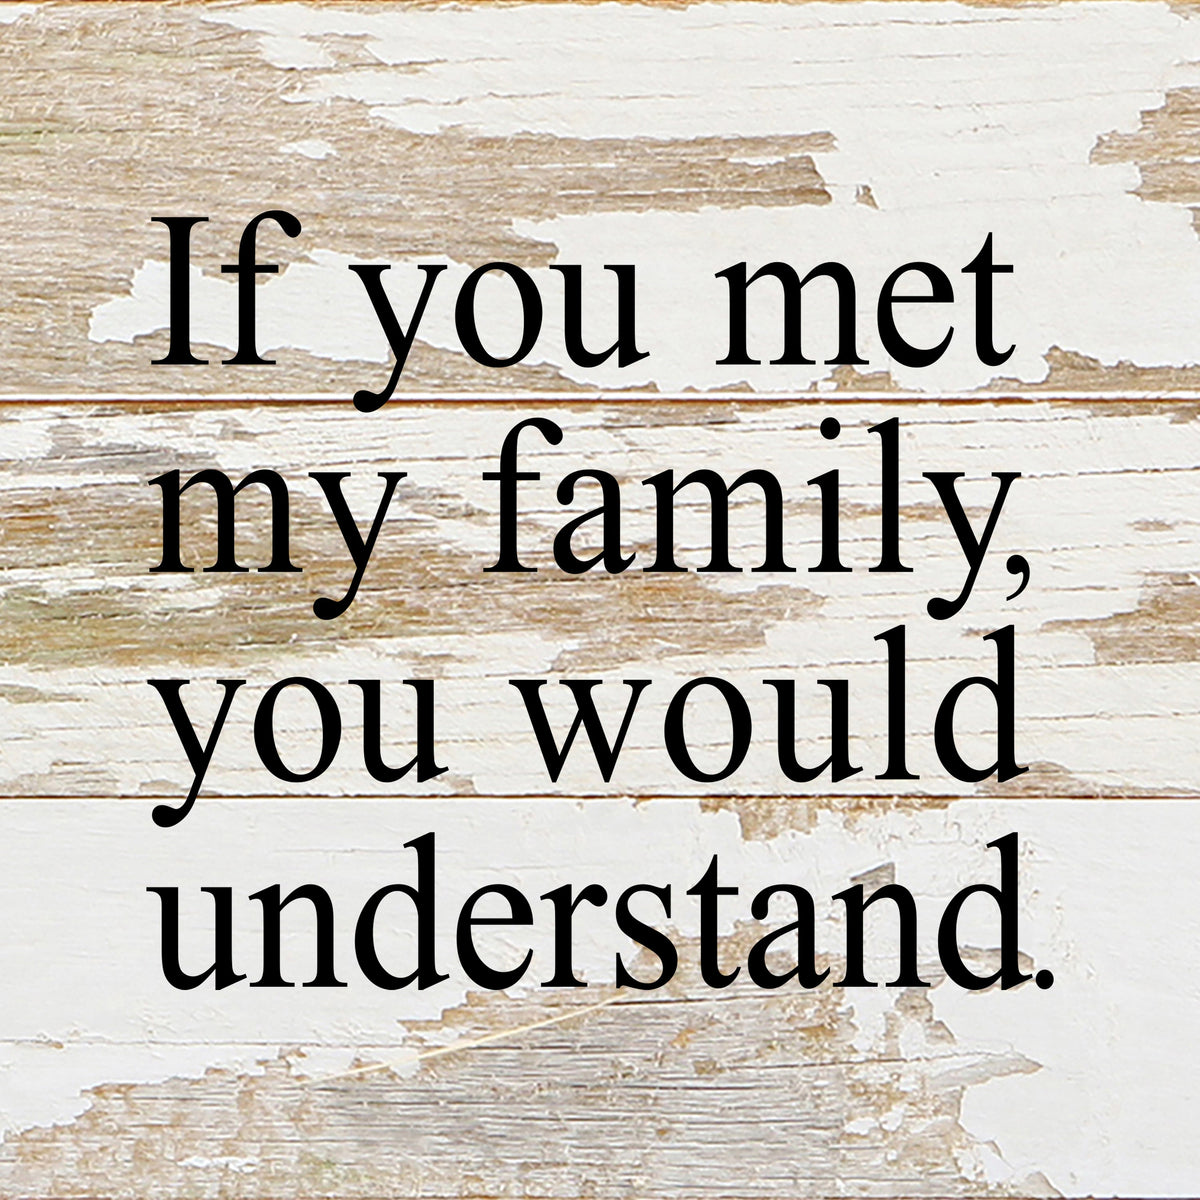 If you met my family, you would understand. / 6"x6" Reclaimed Wood Sign